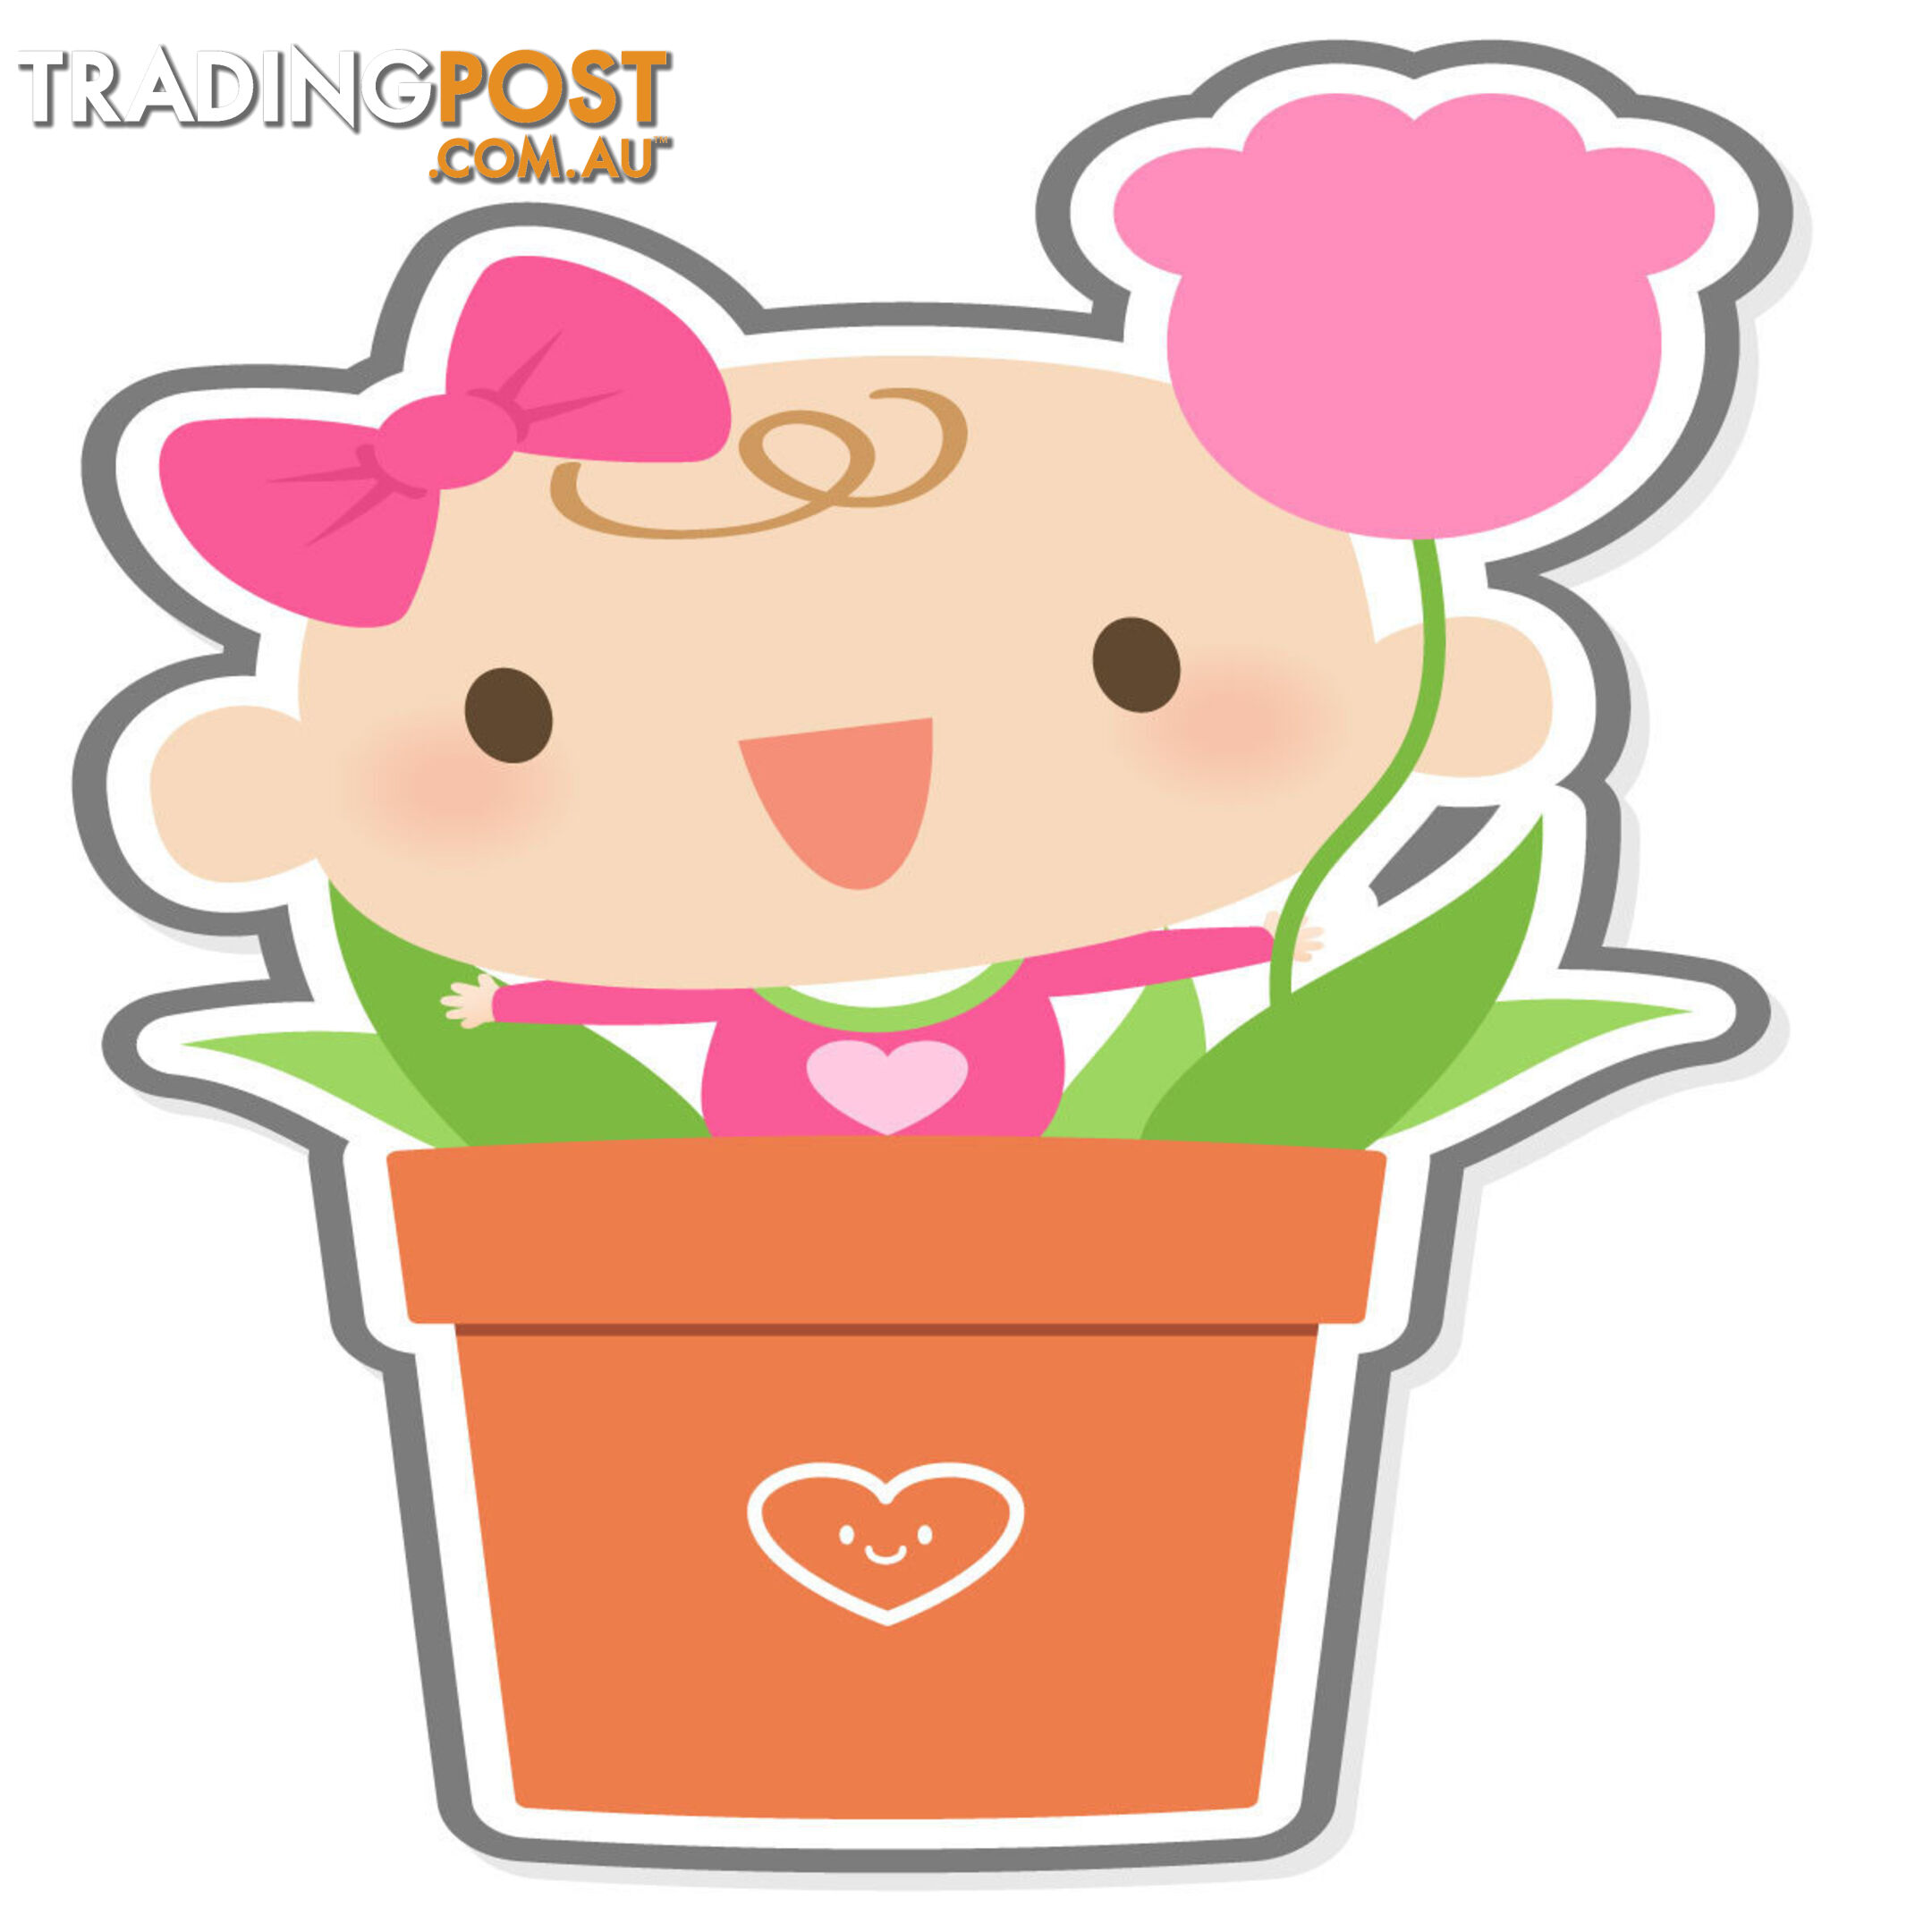 10 X Flowerpot Girl Wall Stickers - Totally Movable